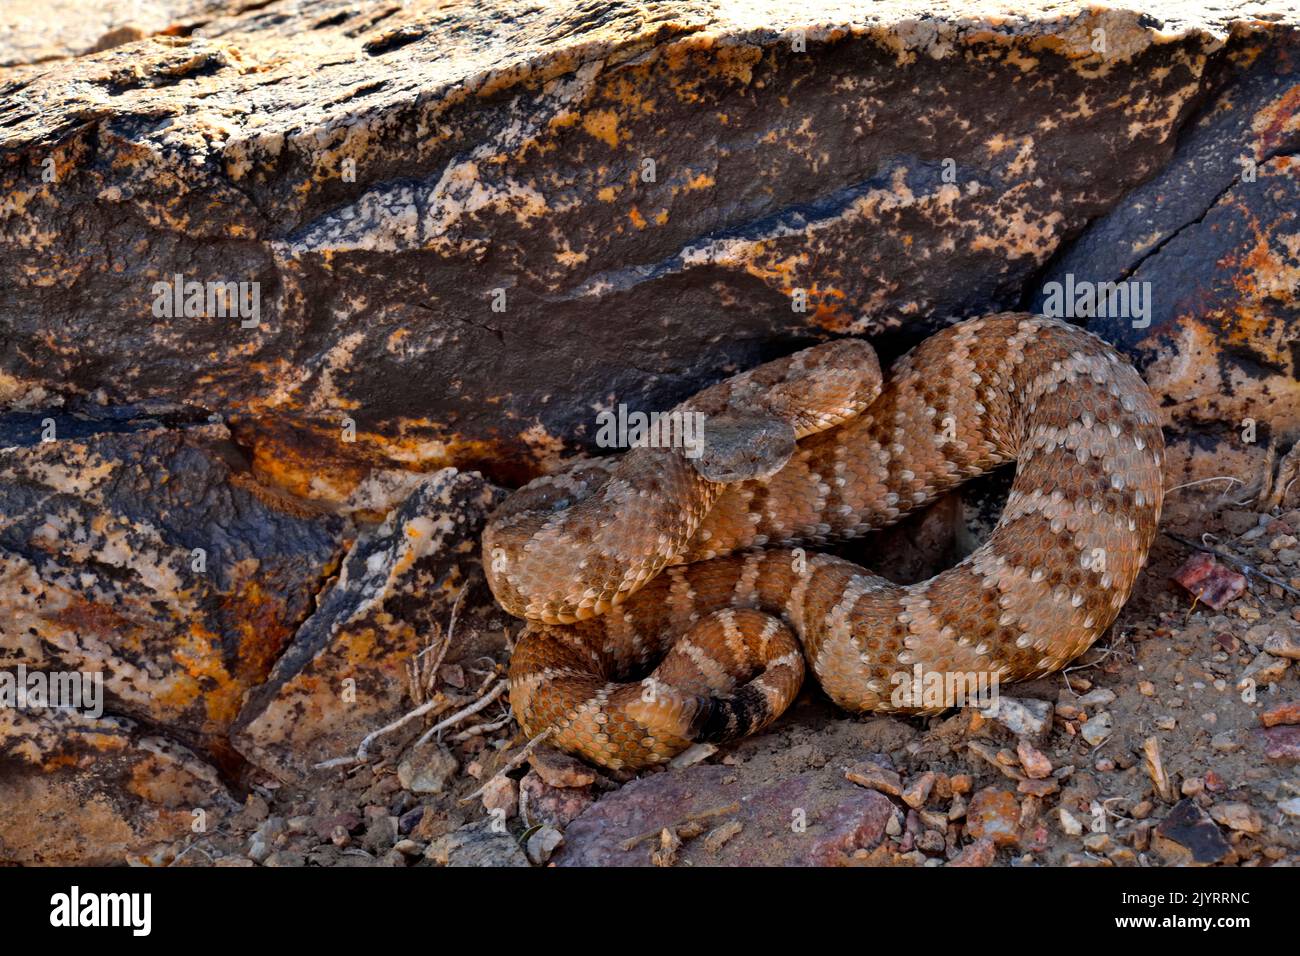 Panamint Rattlesnake (Crotalus stefensi), California Centrale-Orientale, S.W. Nevada. Foto Stock